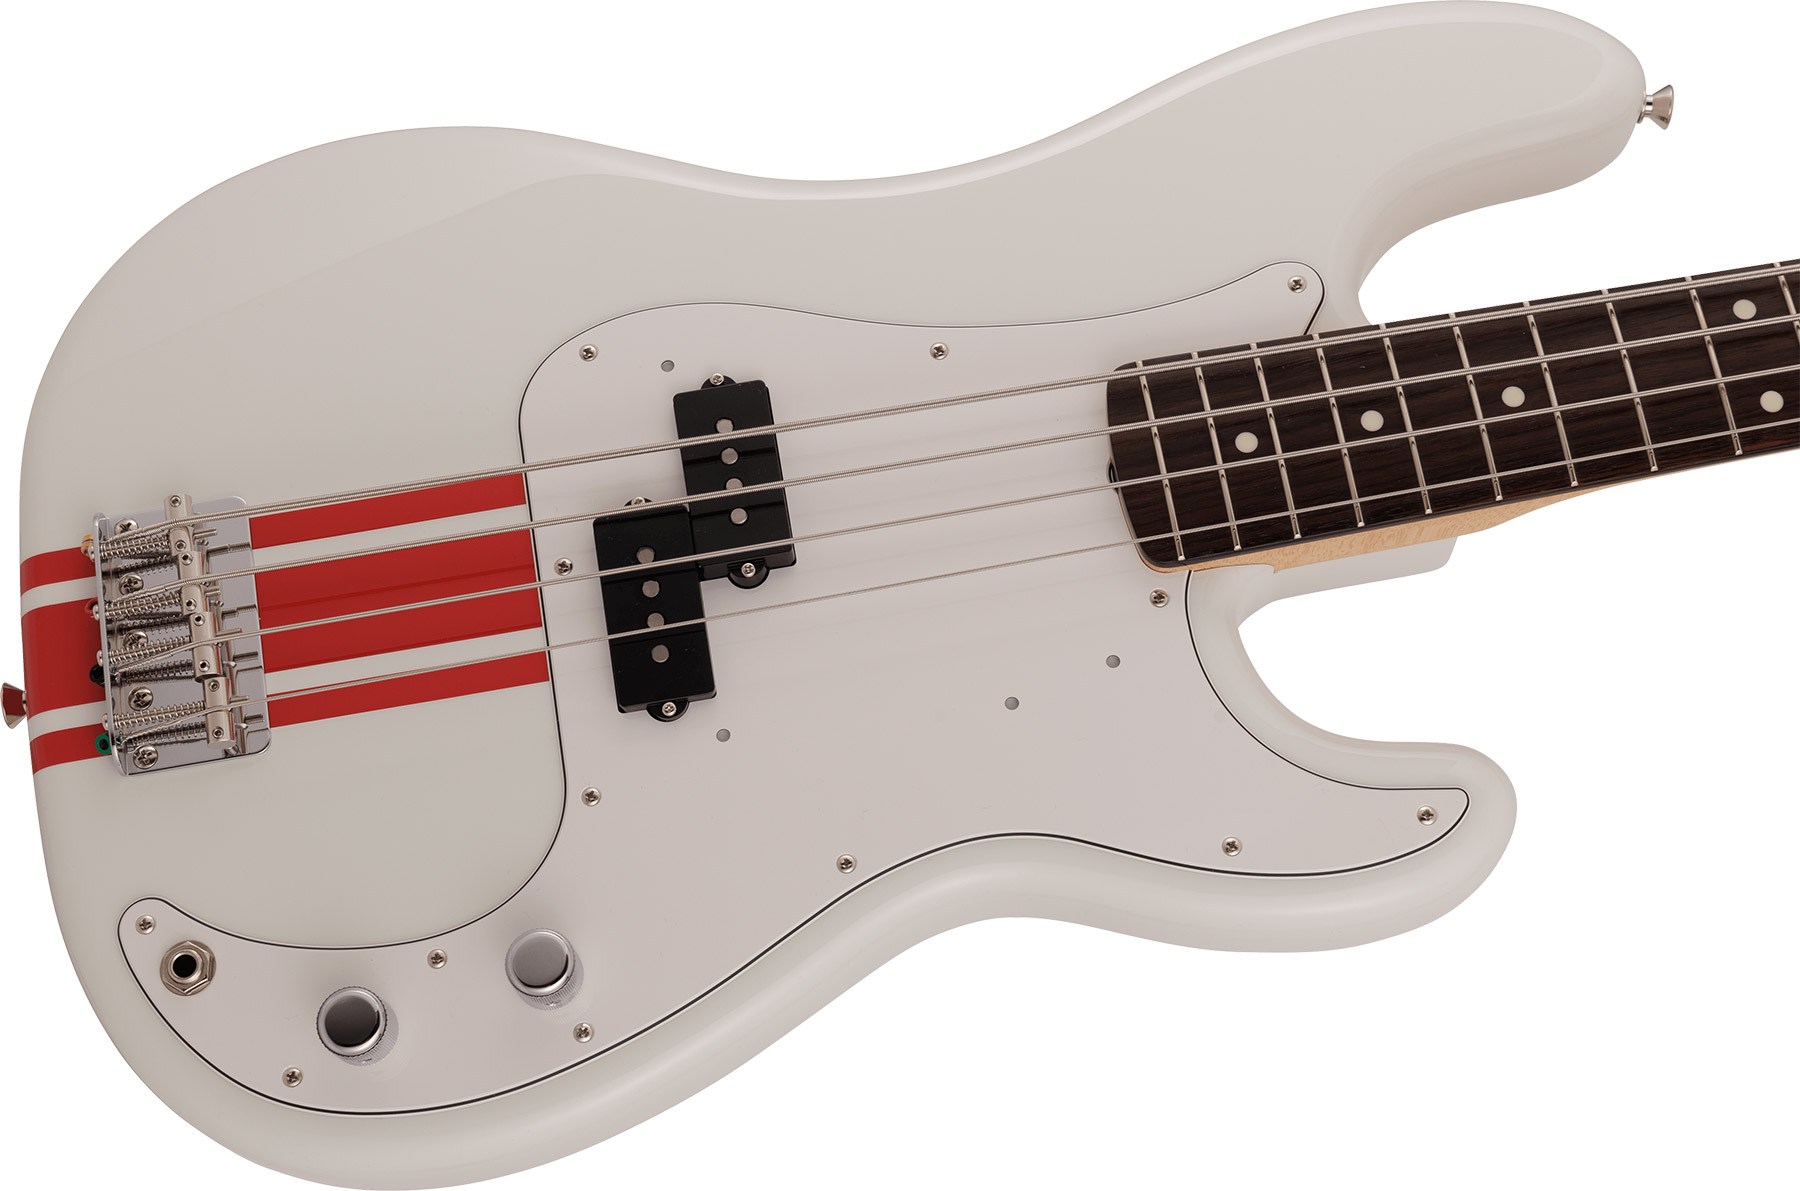 Fender Precision Bass Traditional 60s Mij Jap Rw - Olympic White W/ Red Competition Stripe - Solid body electric bass - Variation 2